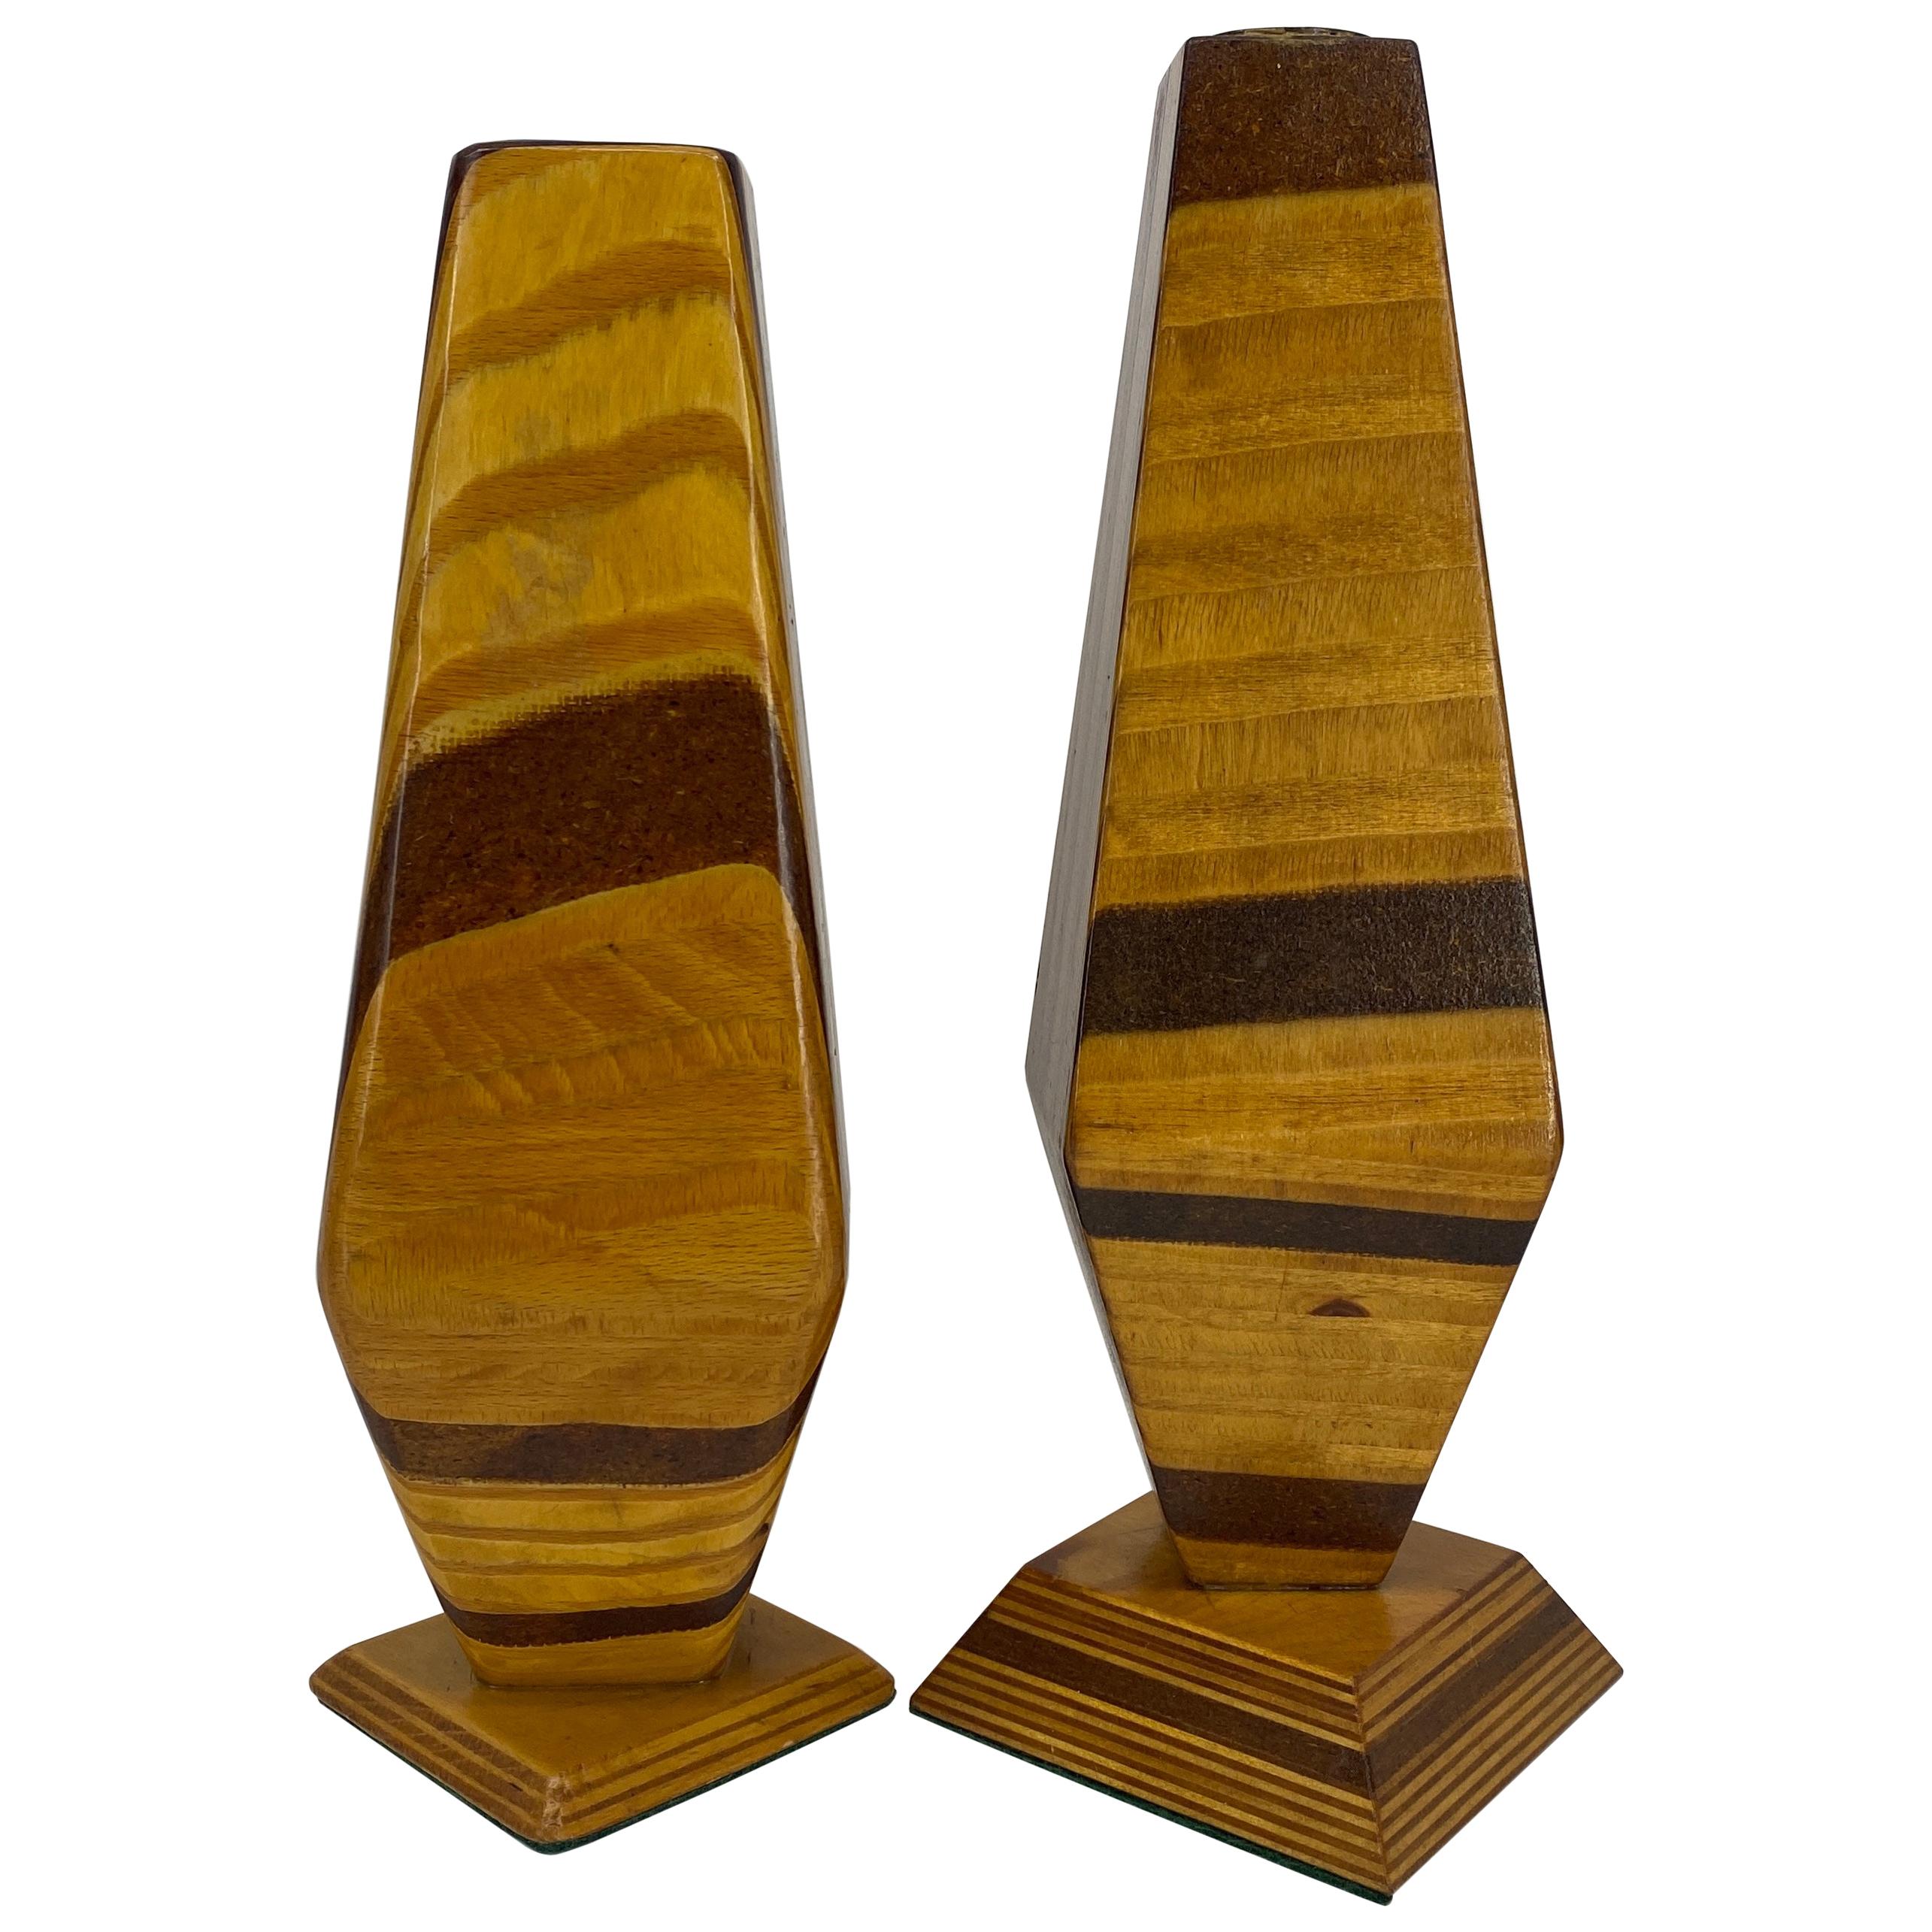 Pair of Tall Mid-Century Modern Wooden Candle Holders